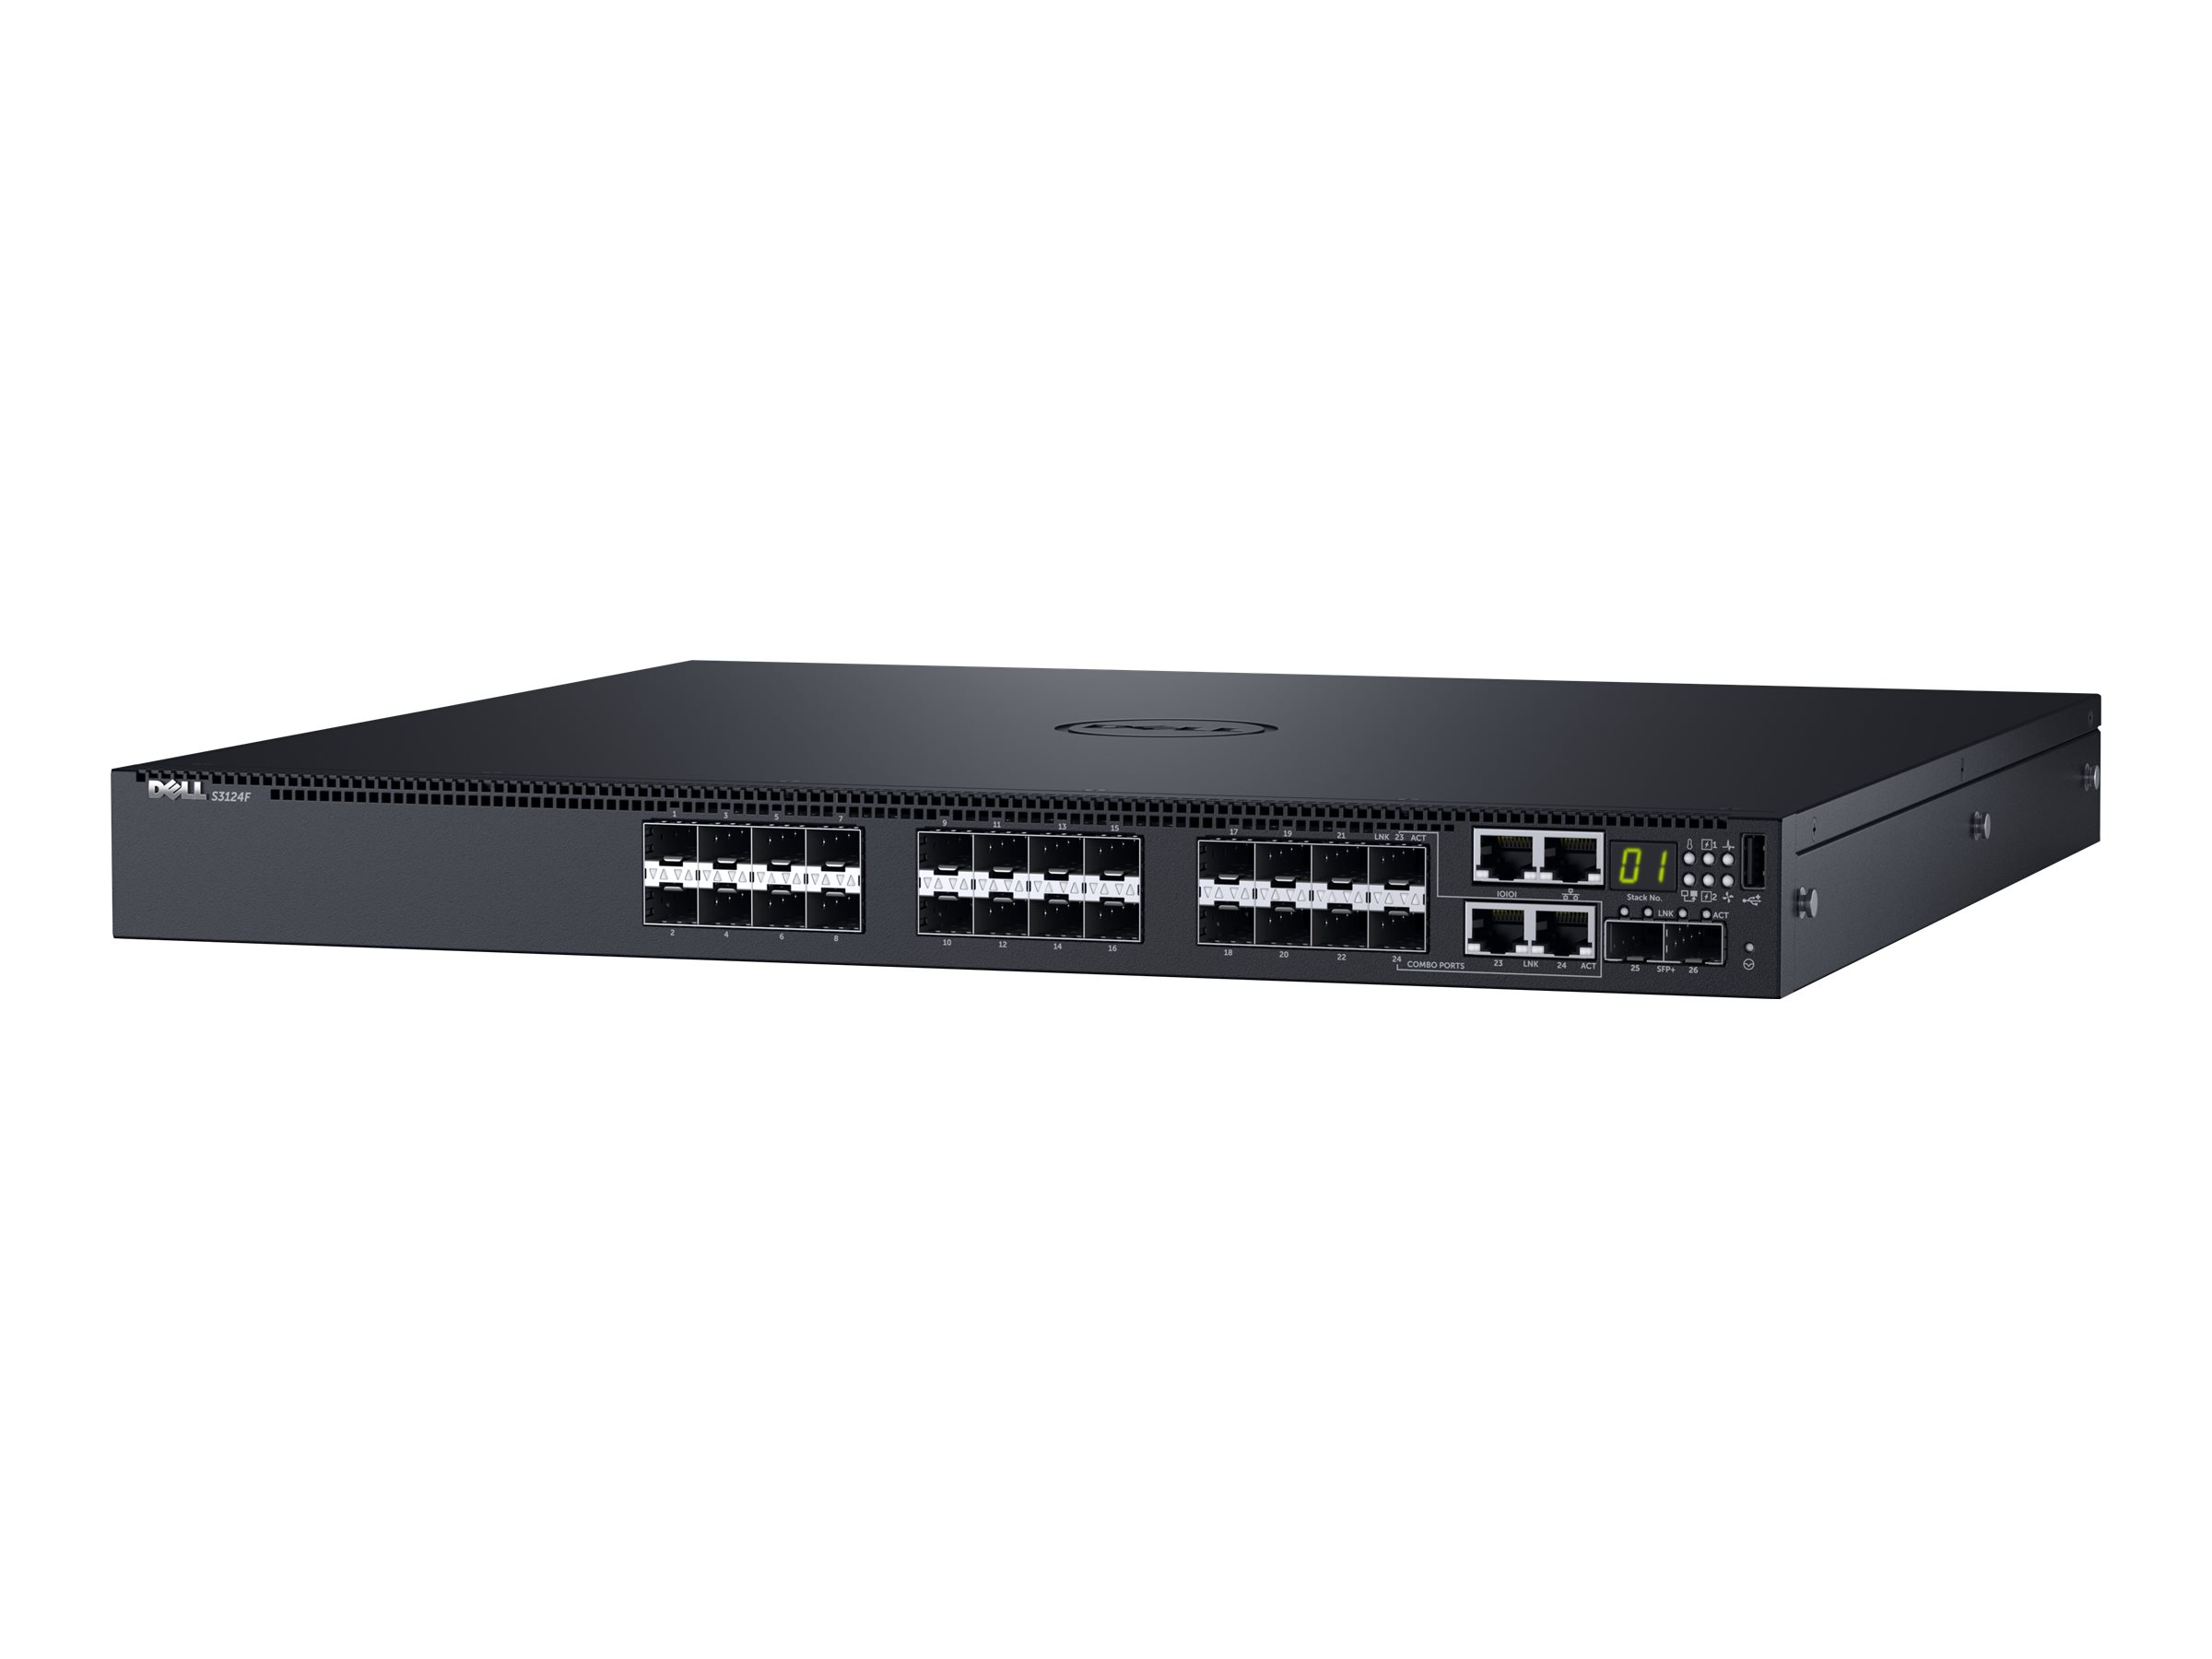 Dell Networking S3124F - Switch - L3 - managed - 24 x Gigabit SFP + 2 x 10 Gigabit SFP+ + 2 x Kombi-Gigabit-SFP - Luftstrom von 